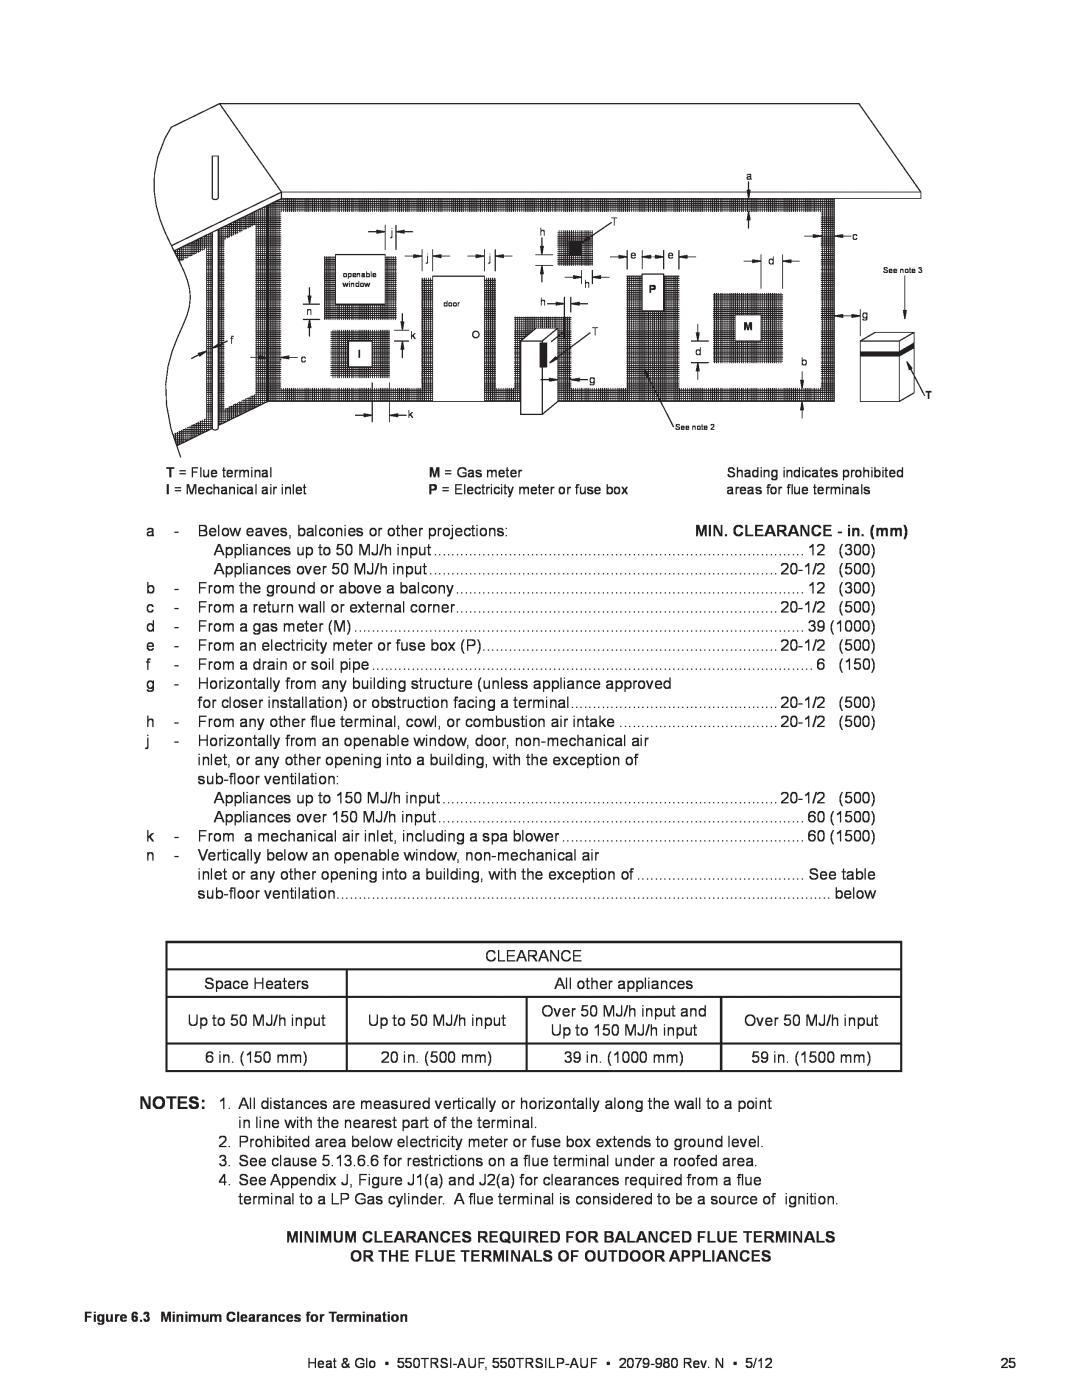 Heat & Glo LifeStyle 550TRSI-AUF owner manual MIN. CLEARANCE - in. mm, Or The Flue Terminals Of Outdoor Appliances 